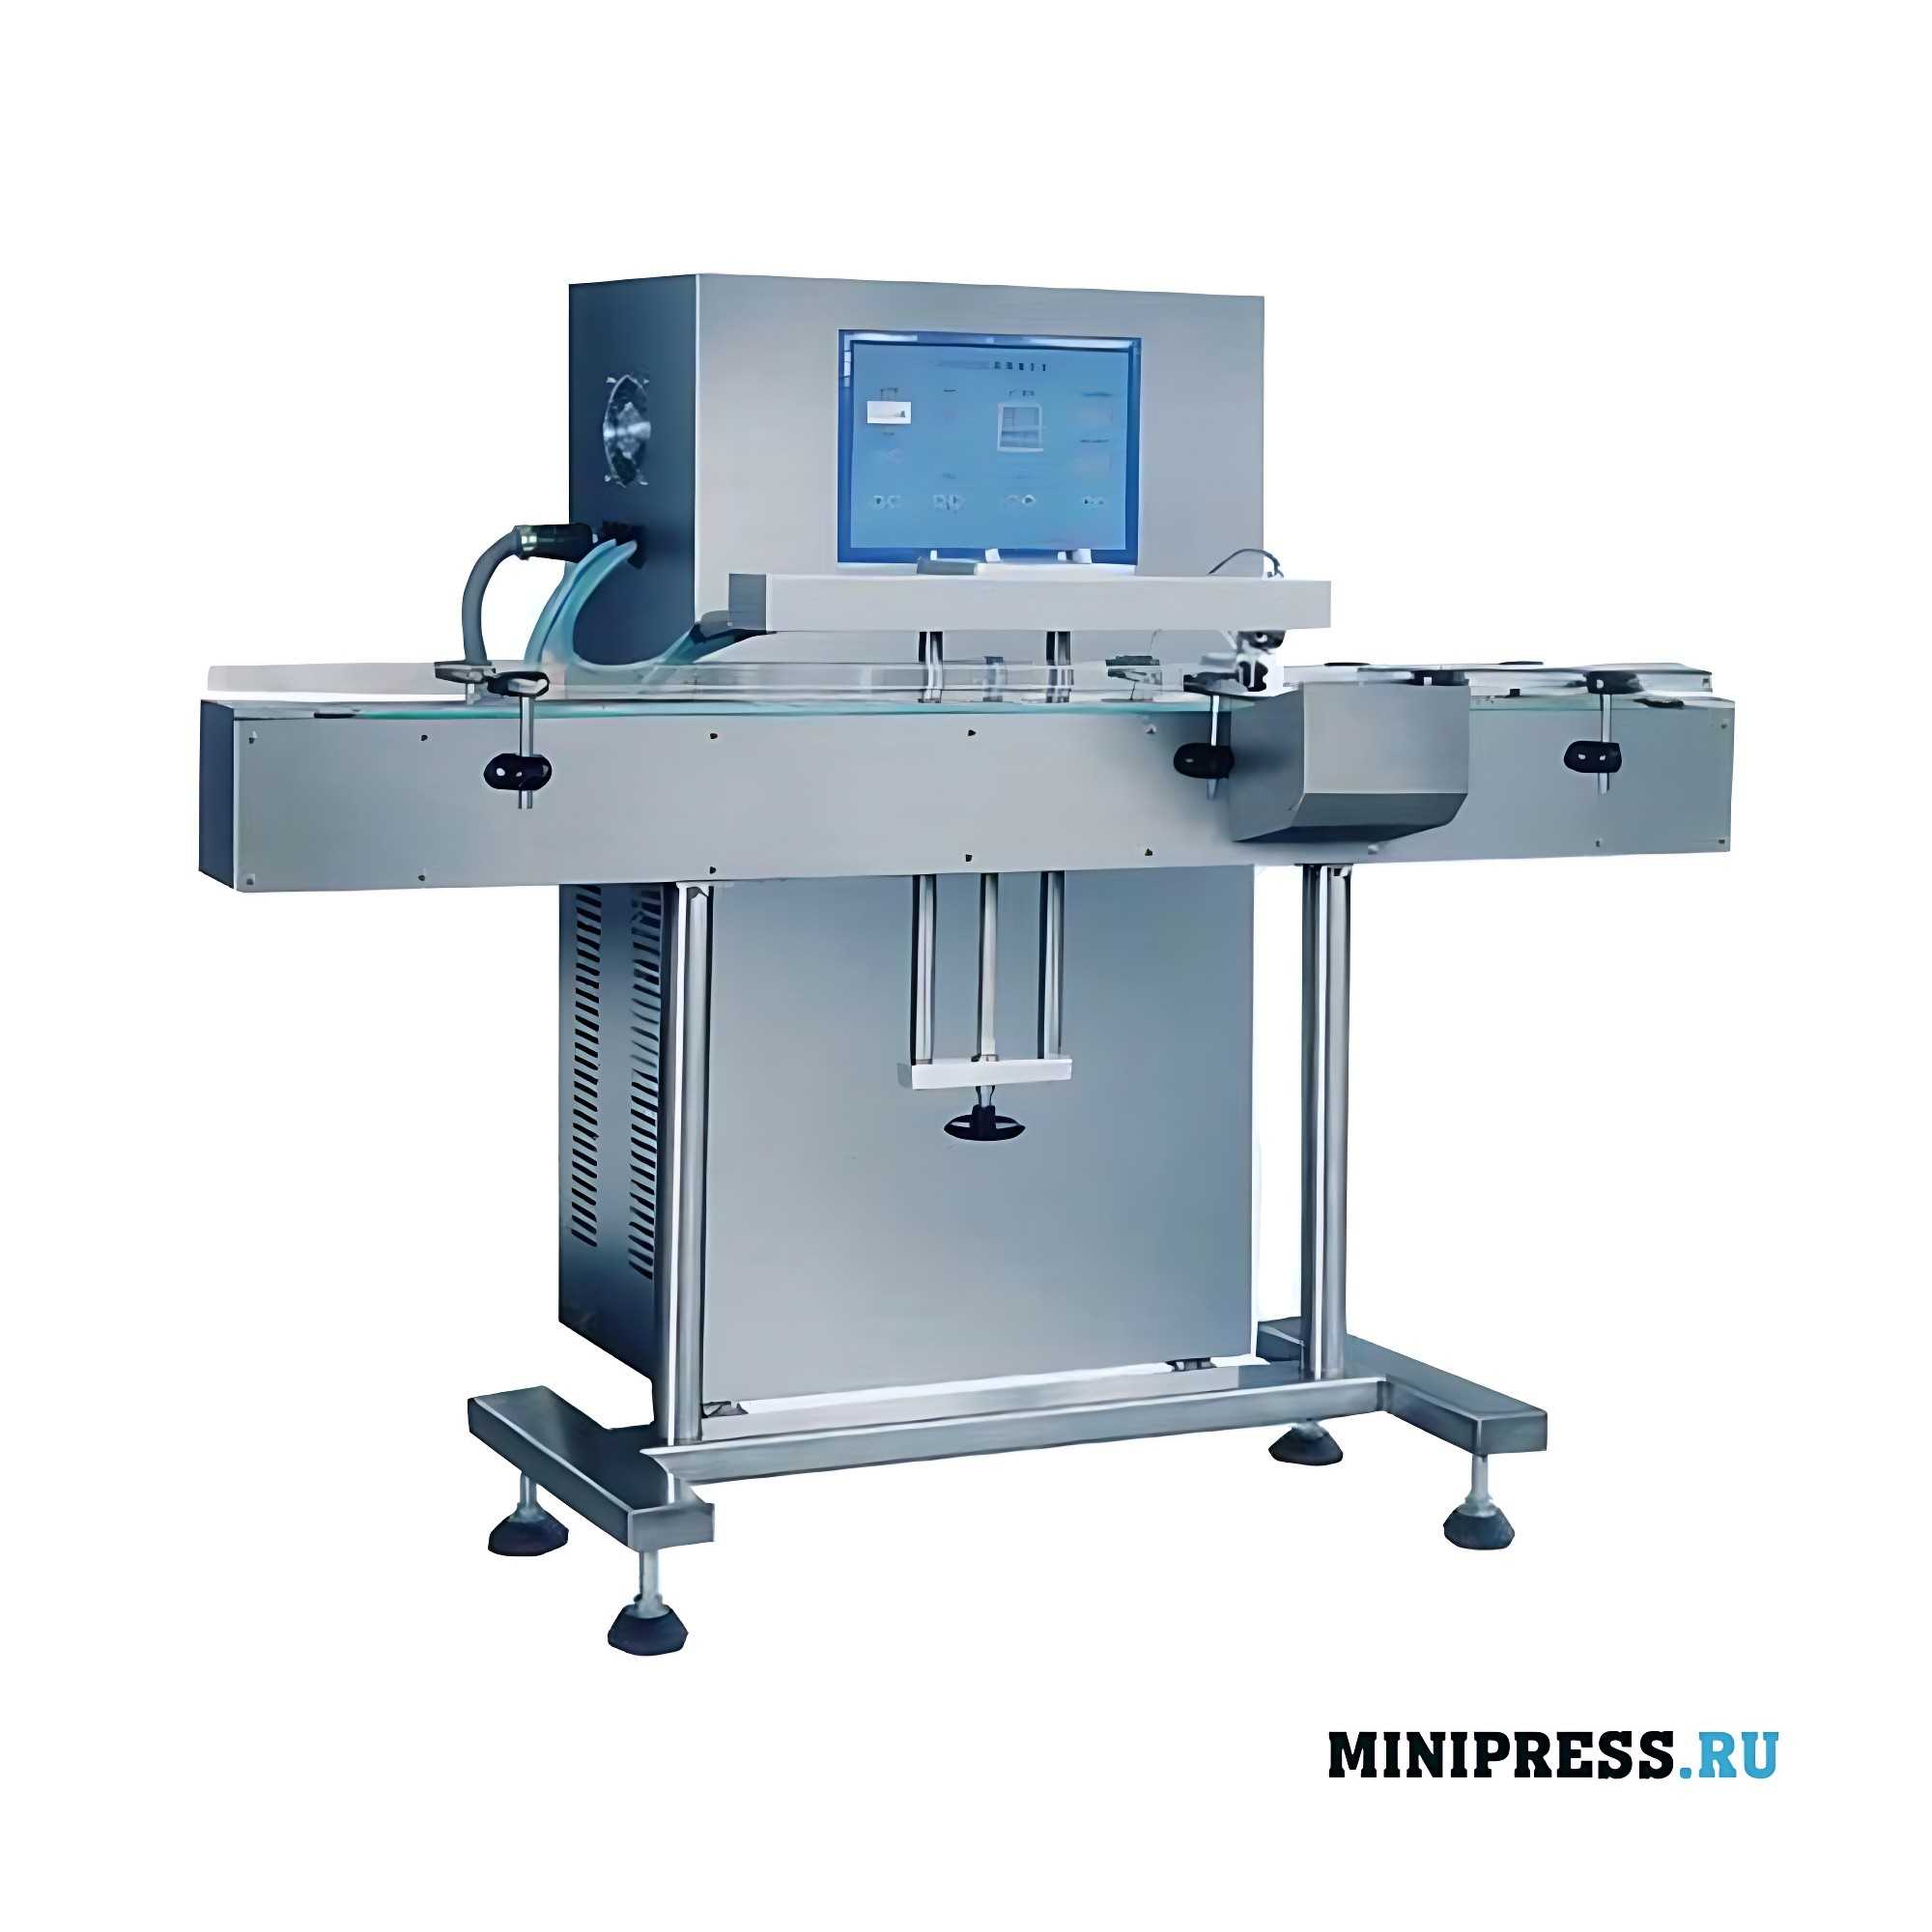 Equipment for induction sealing of the lid with aluminum foil DSCHP 1B